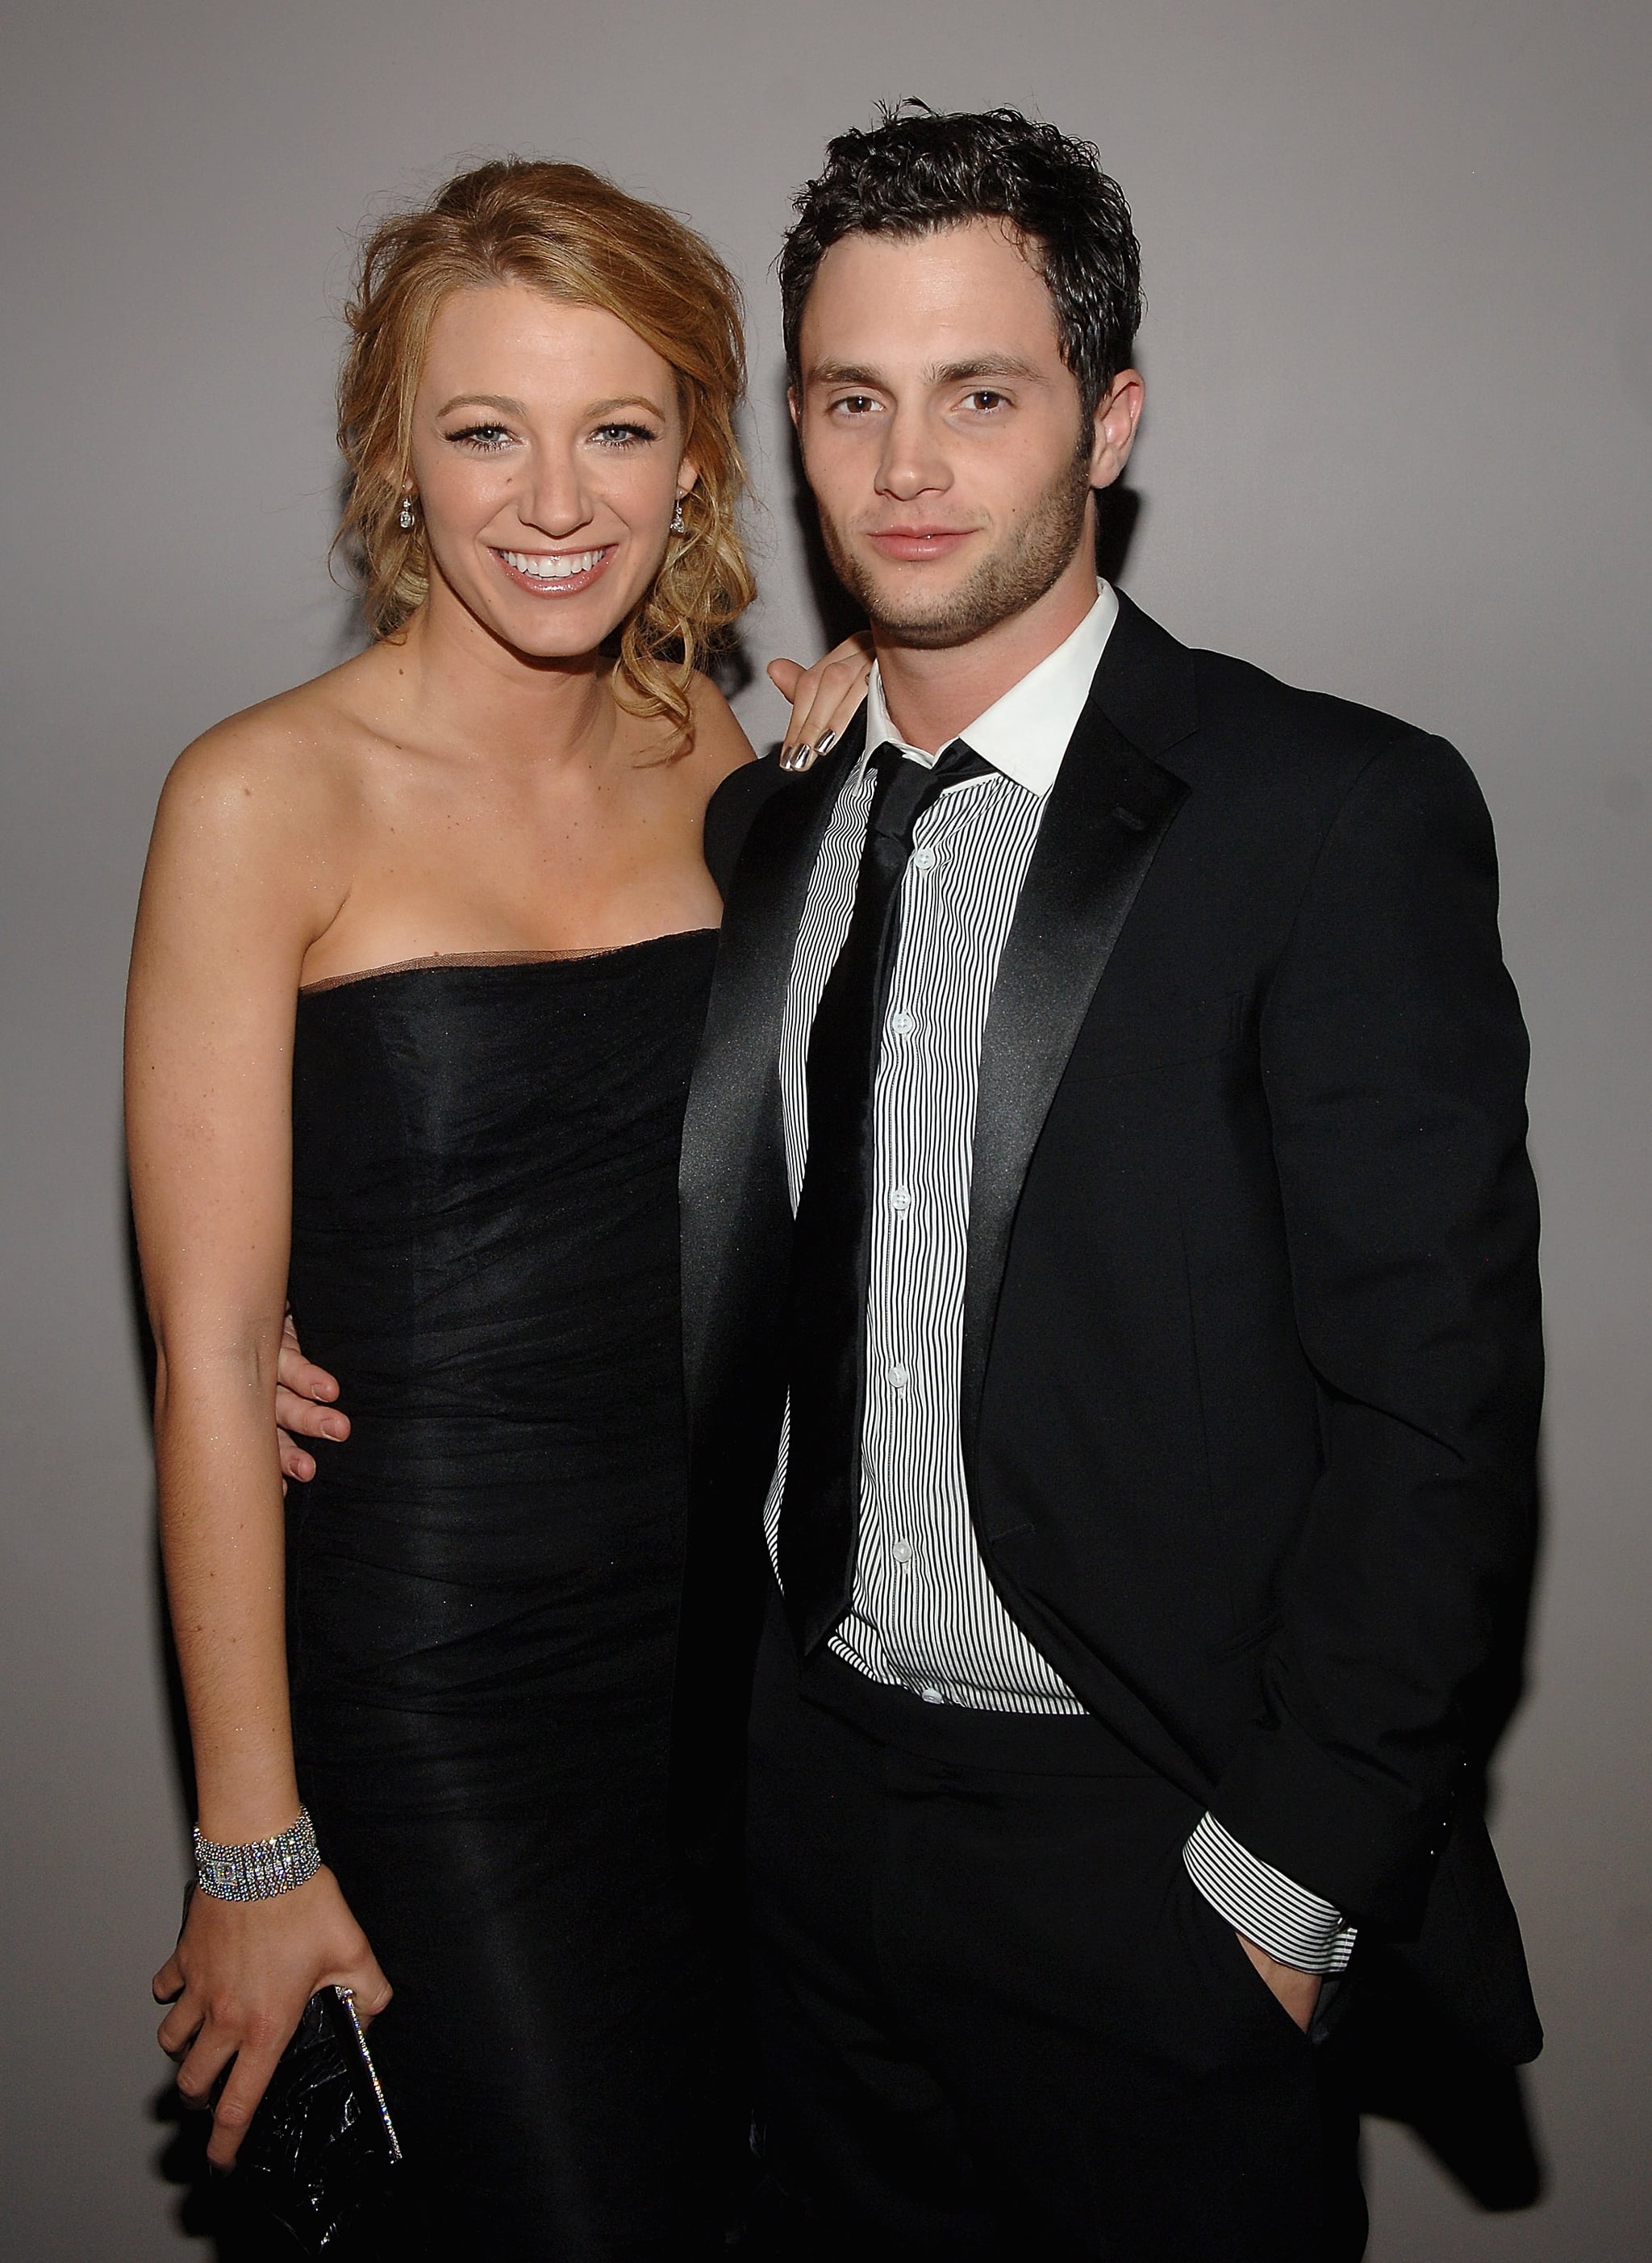 NEW YORK - MAY 05:  Blake Lively and Penn Badgley attend the Nina Ricci After Party For Met Ball Hosted By Olivier Theyskens and Lauren Santo Domingo at Philippe in New York on May 5,2008  (Photo by Jamie McCarthy/WireImage)